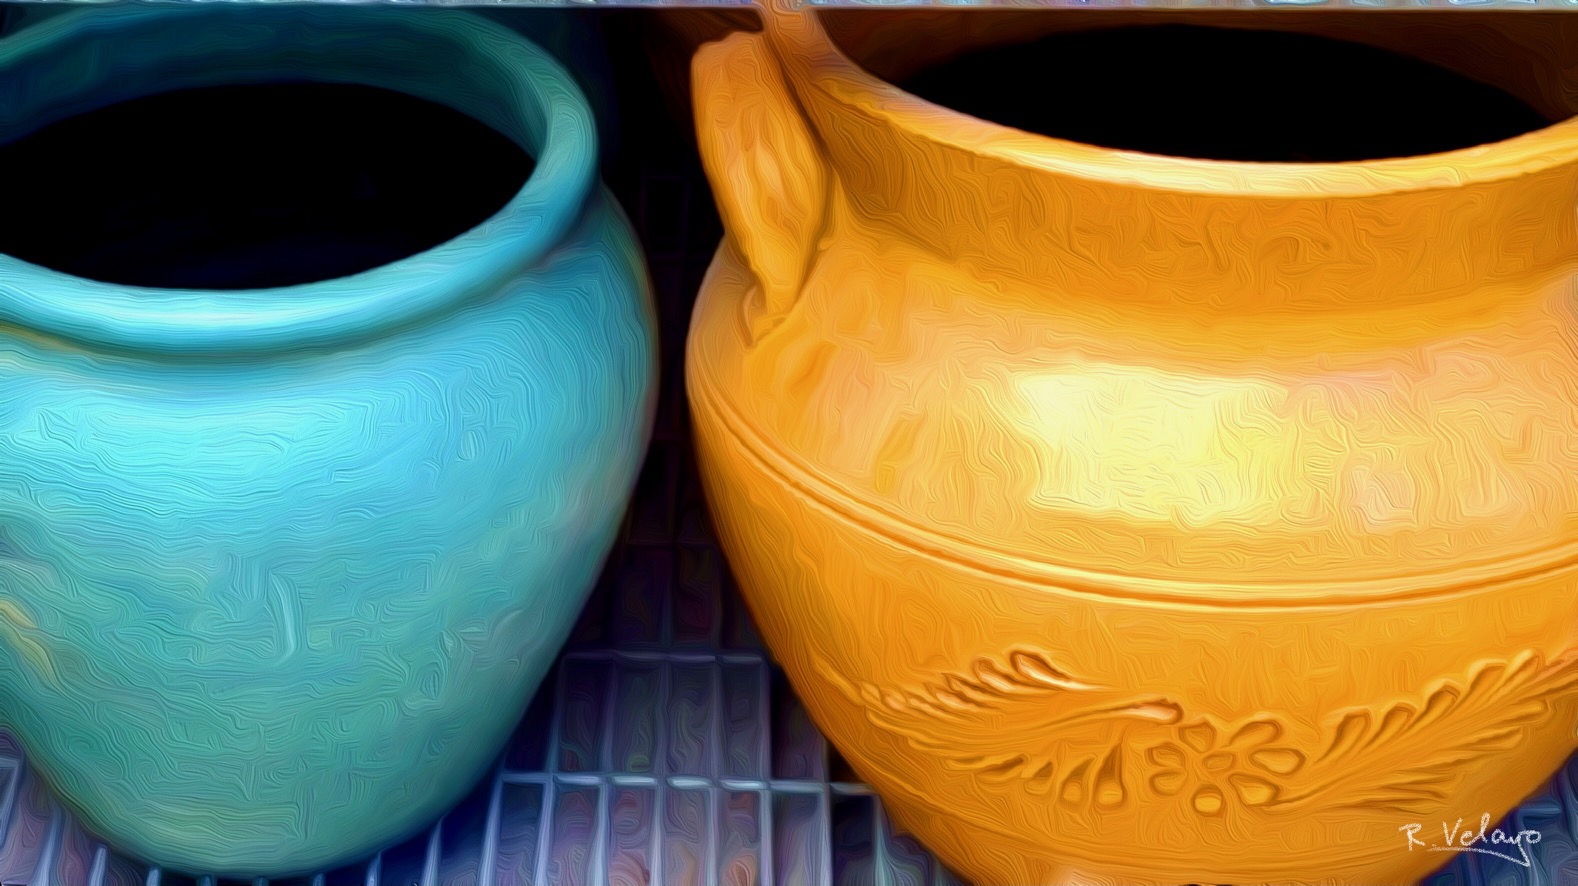 "TWO LARGE GARDEN CLAY POTS" [Created: 3/02/2021]